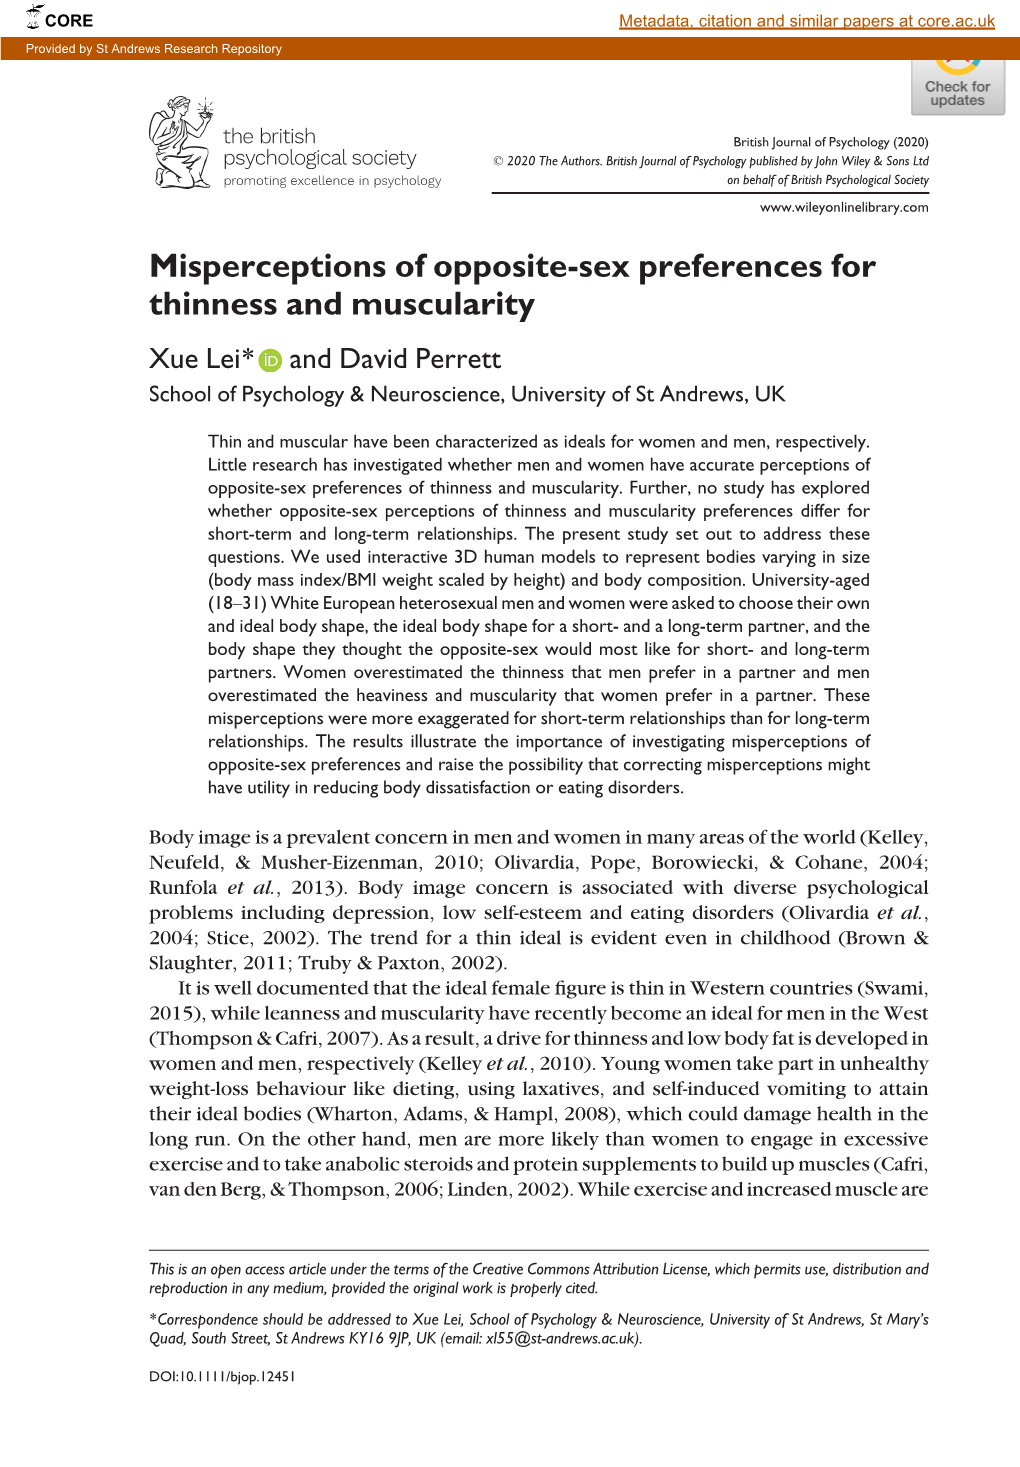 Misperceptions of Opposite‐Sex Preferences for Thinness And